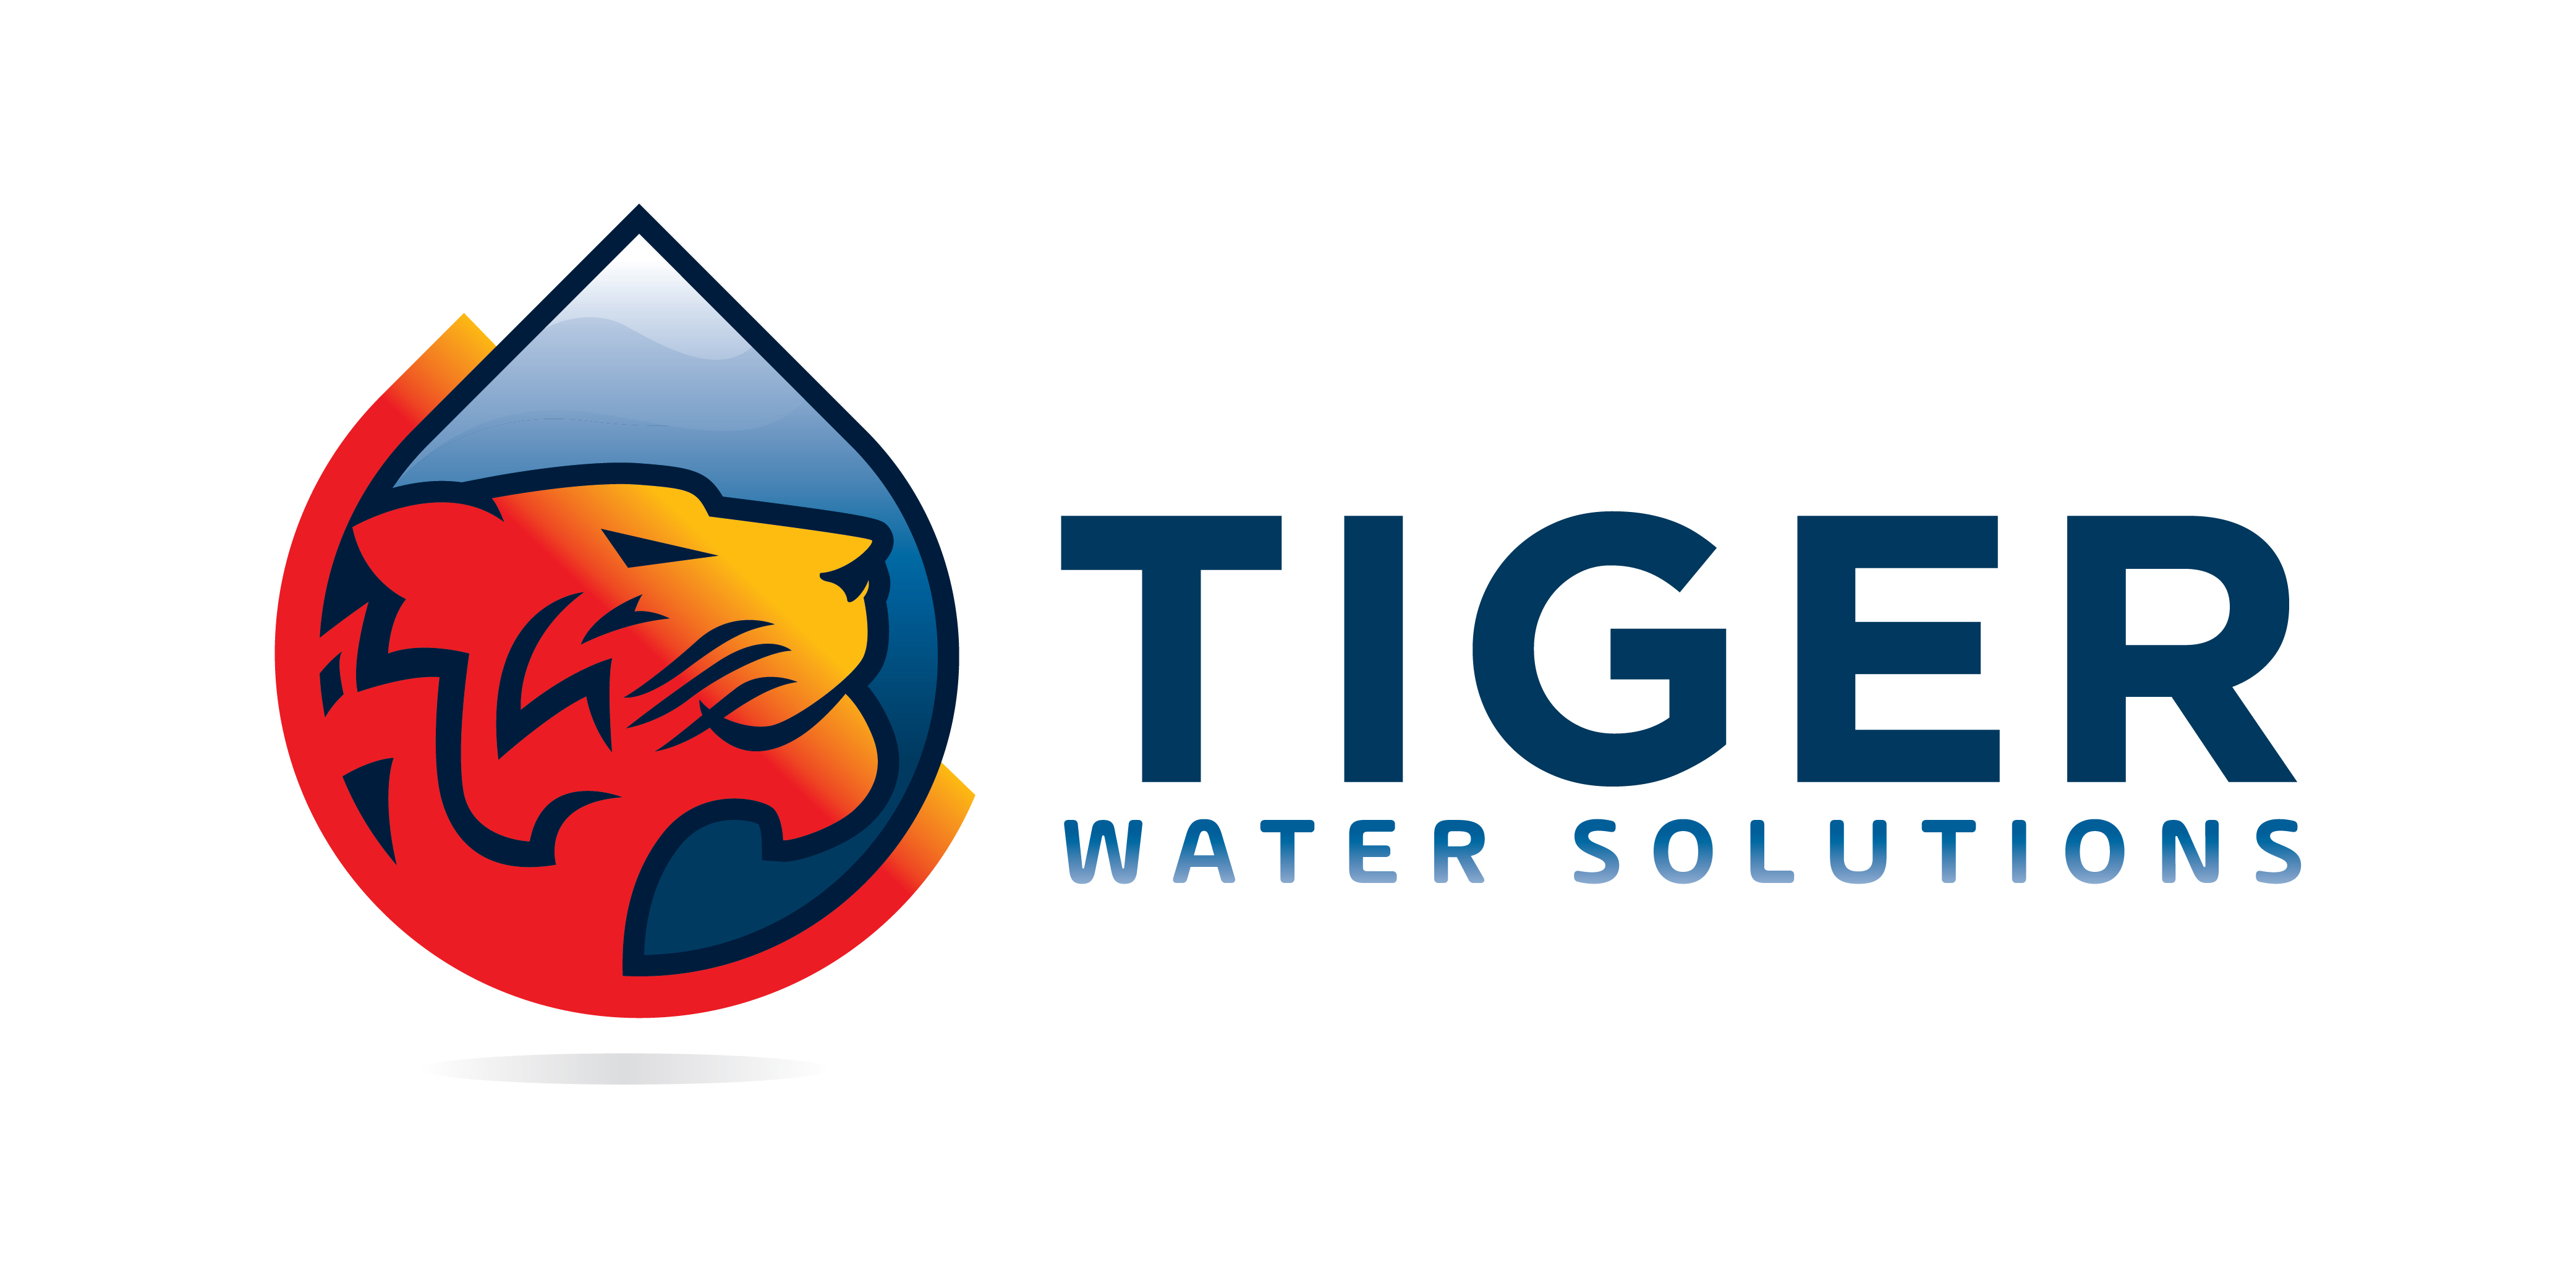 PT TIGER WATER SOLUTIONS